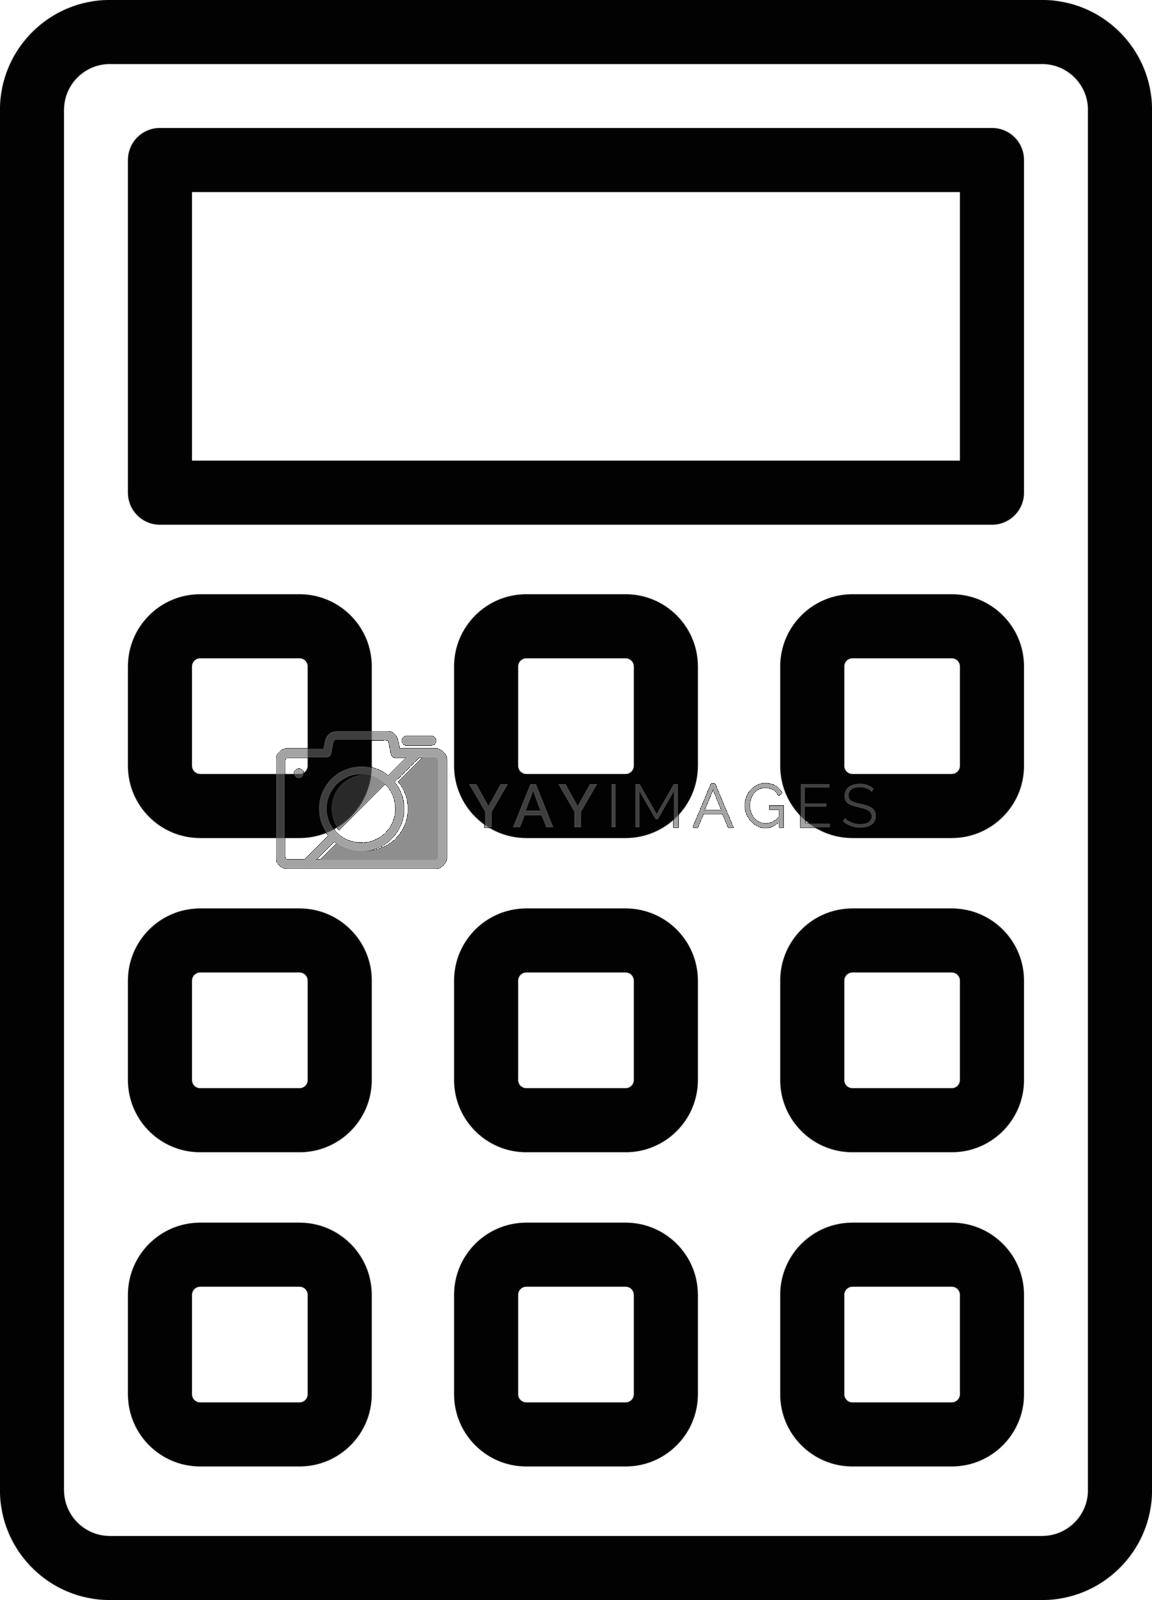 Royalty free image of calculator by vectorstall